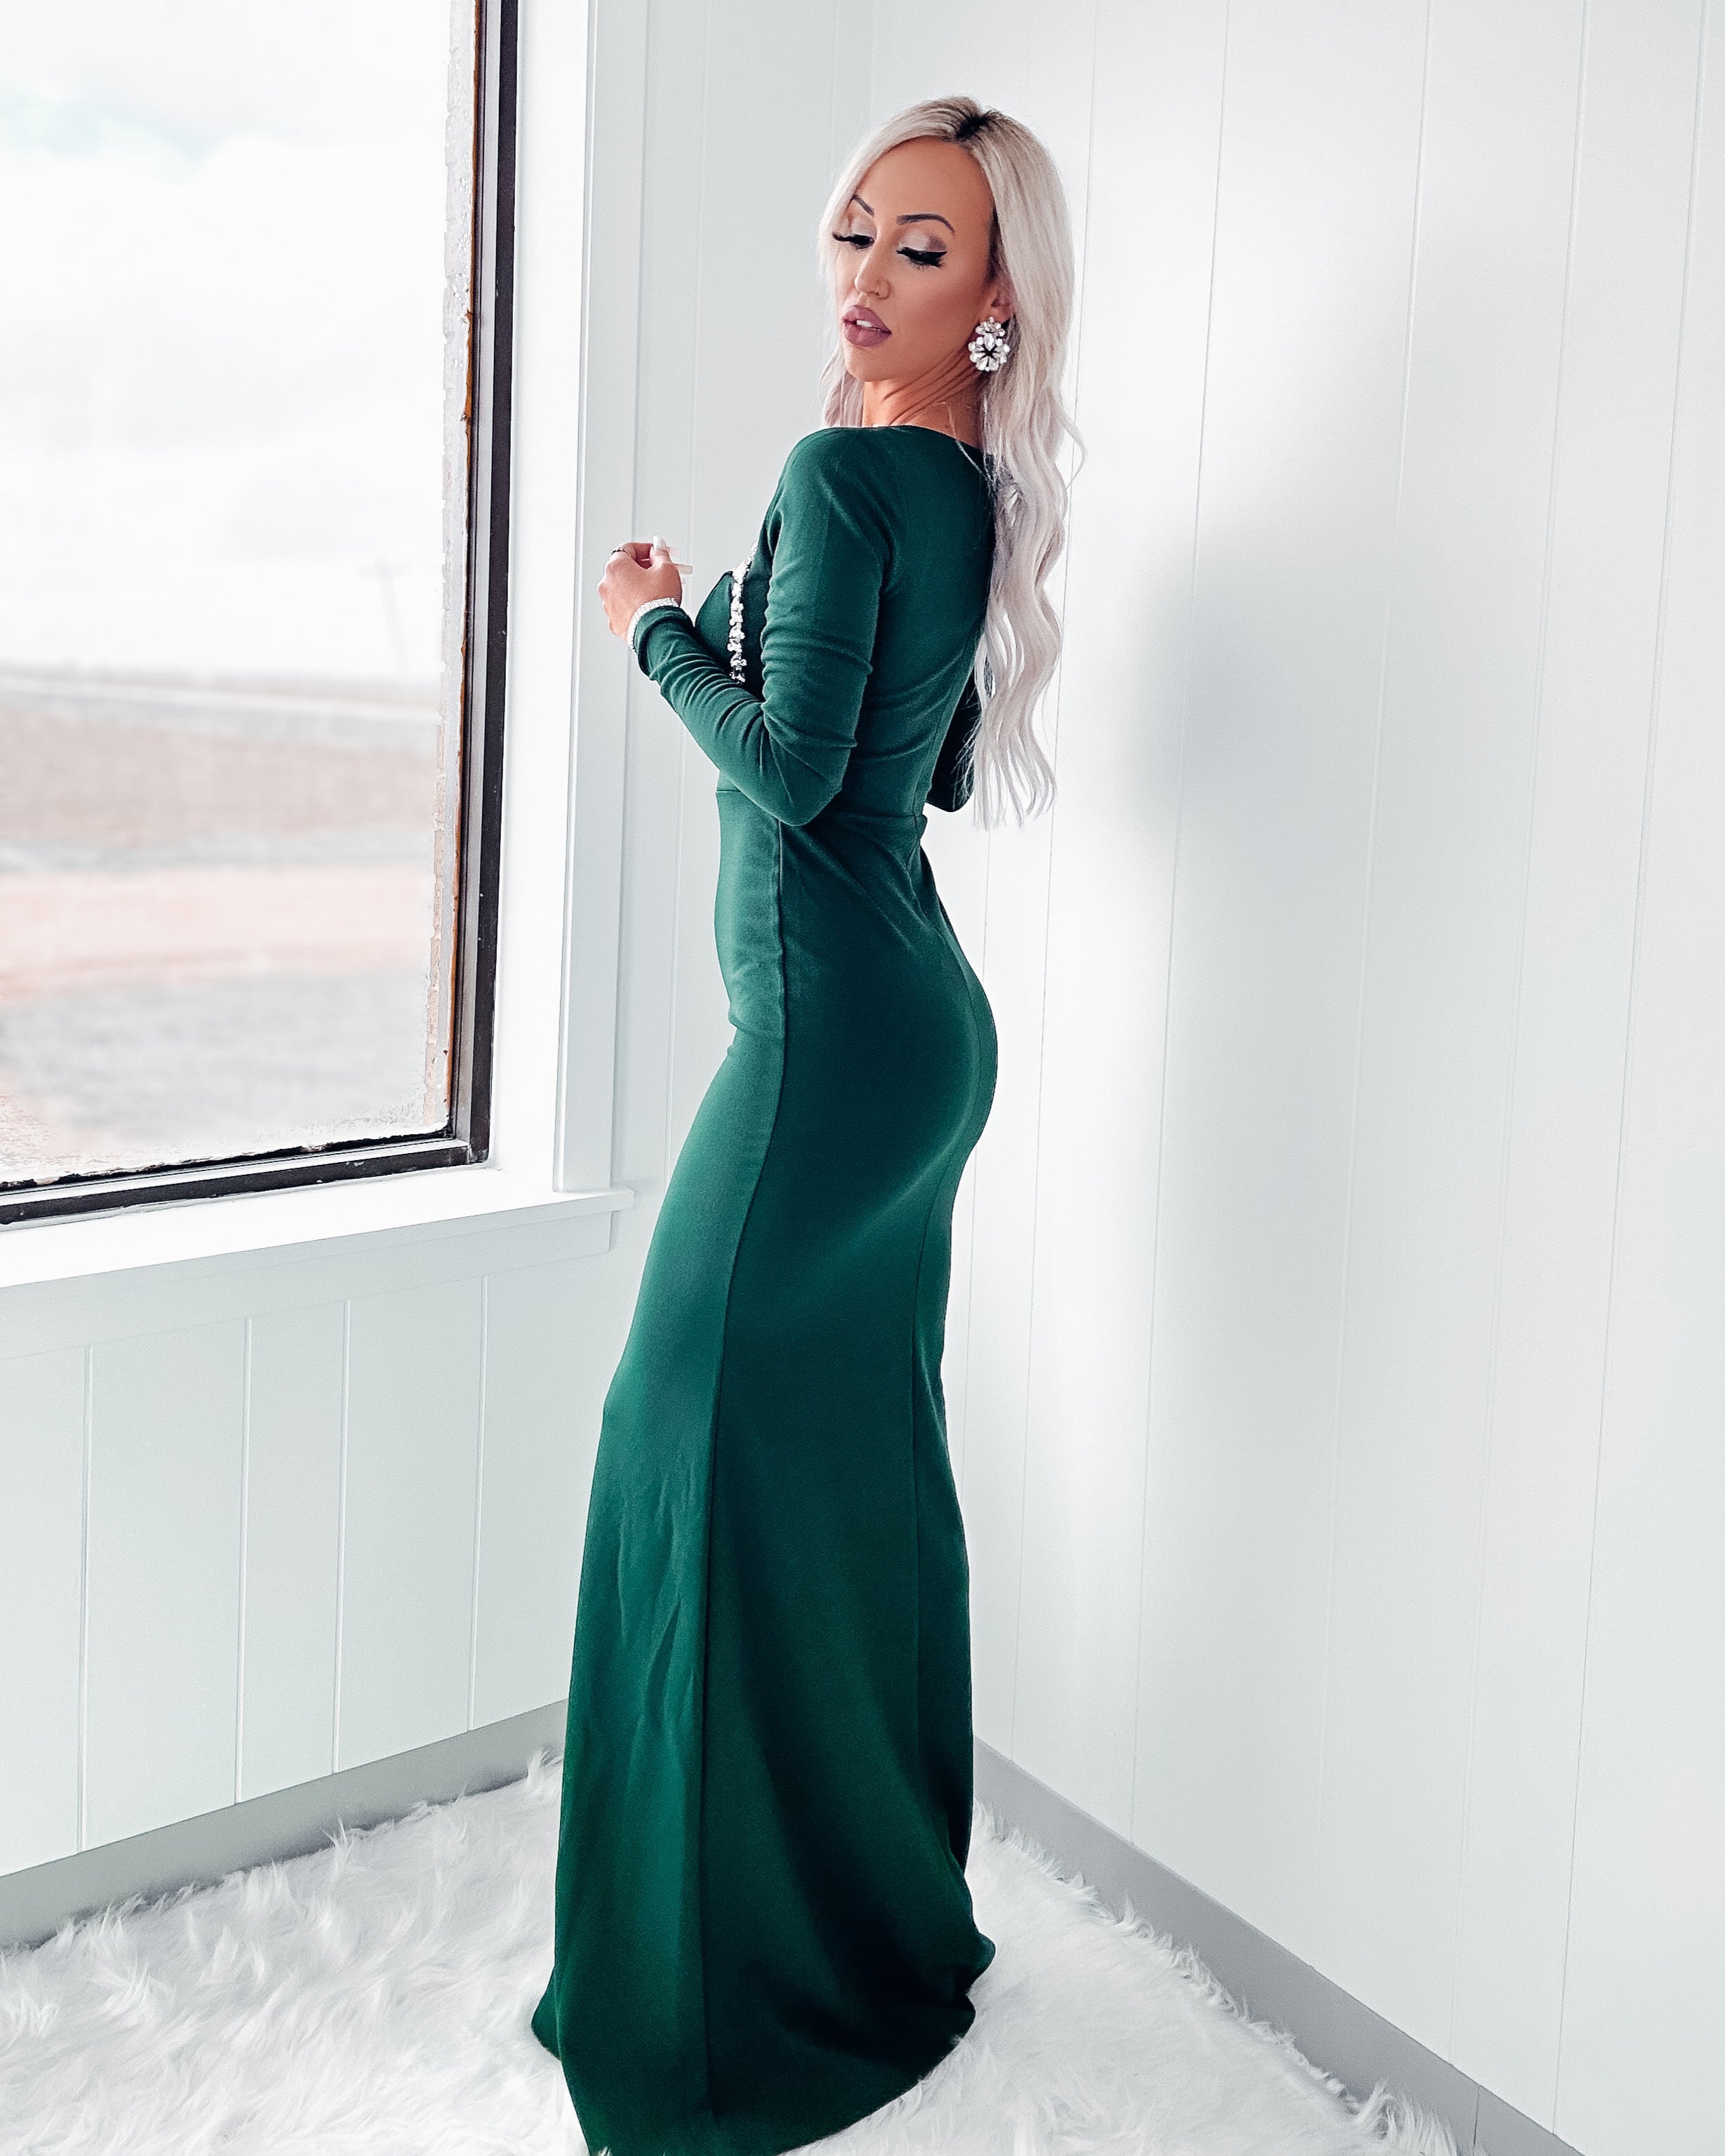 Rise To The Occasion Rhinestone Maxi Dress - Green